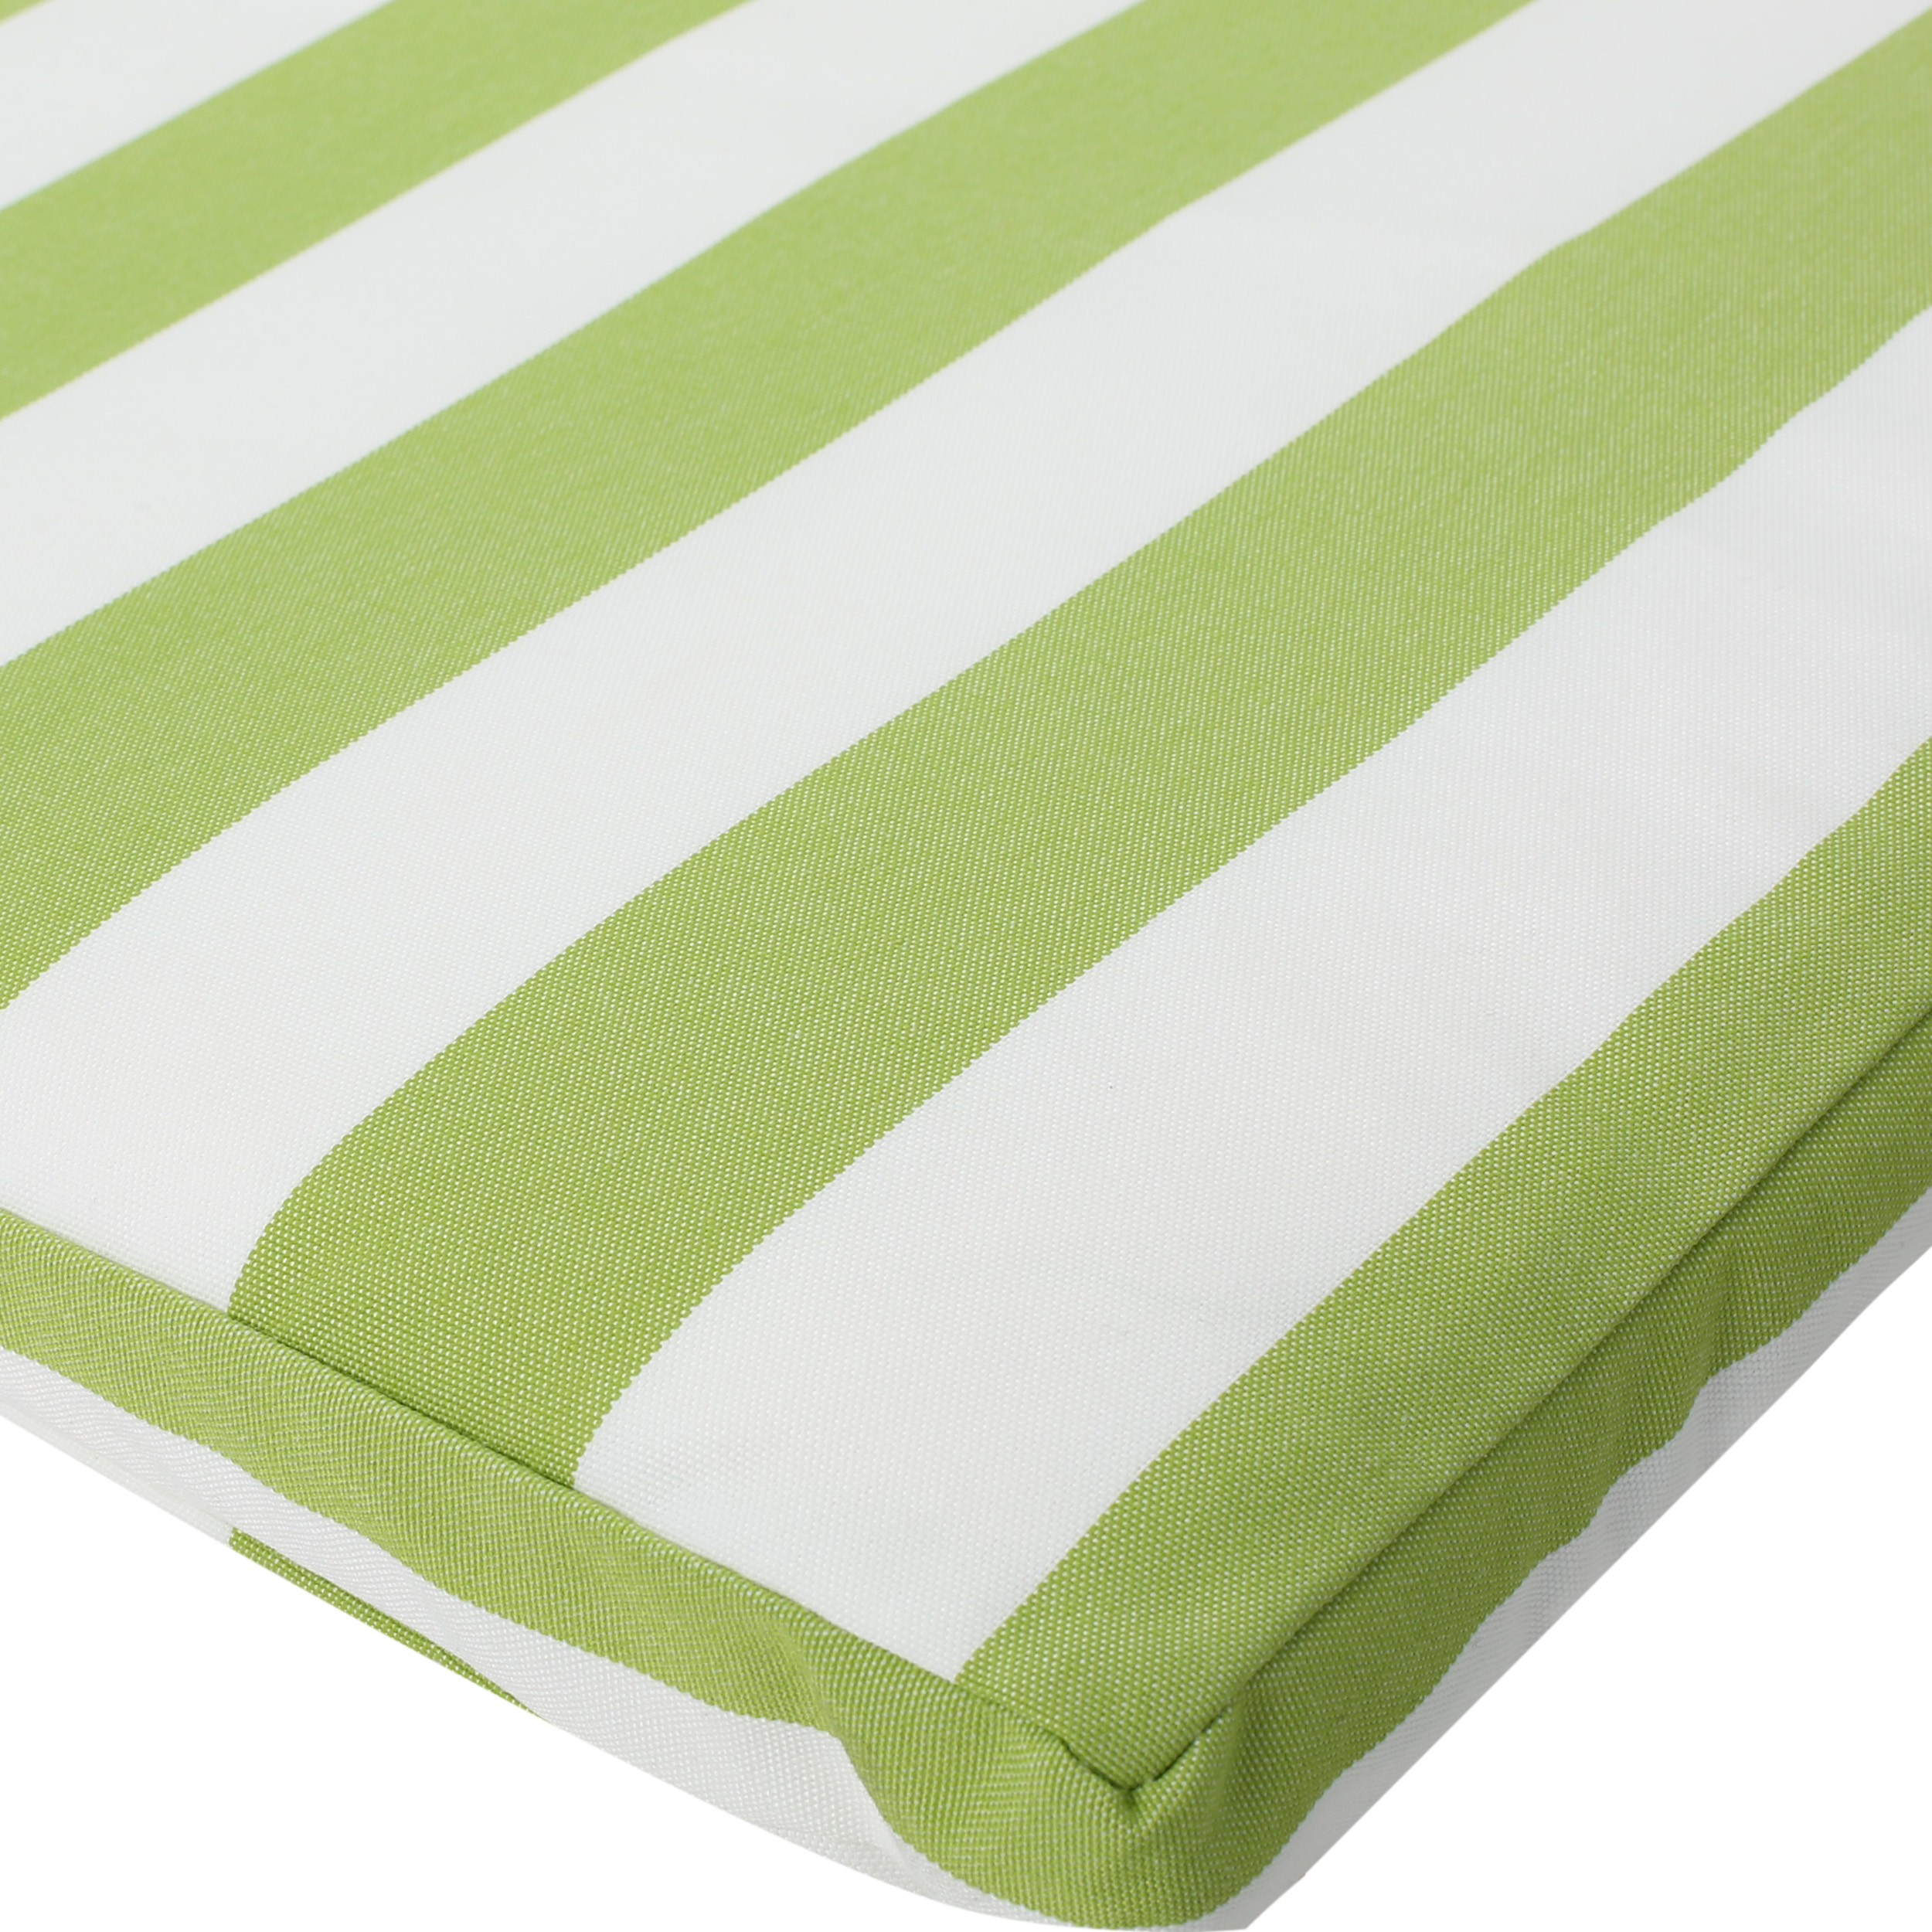 Anthony Outdoor Water Resistant Chaise Lounge Cushion, Green and White Stripe - image 4 of 6